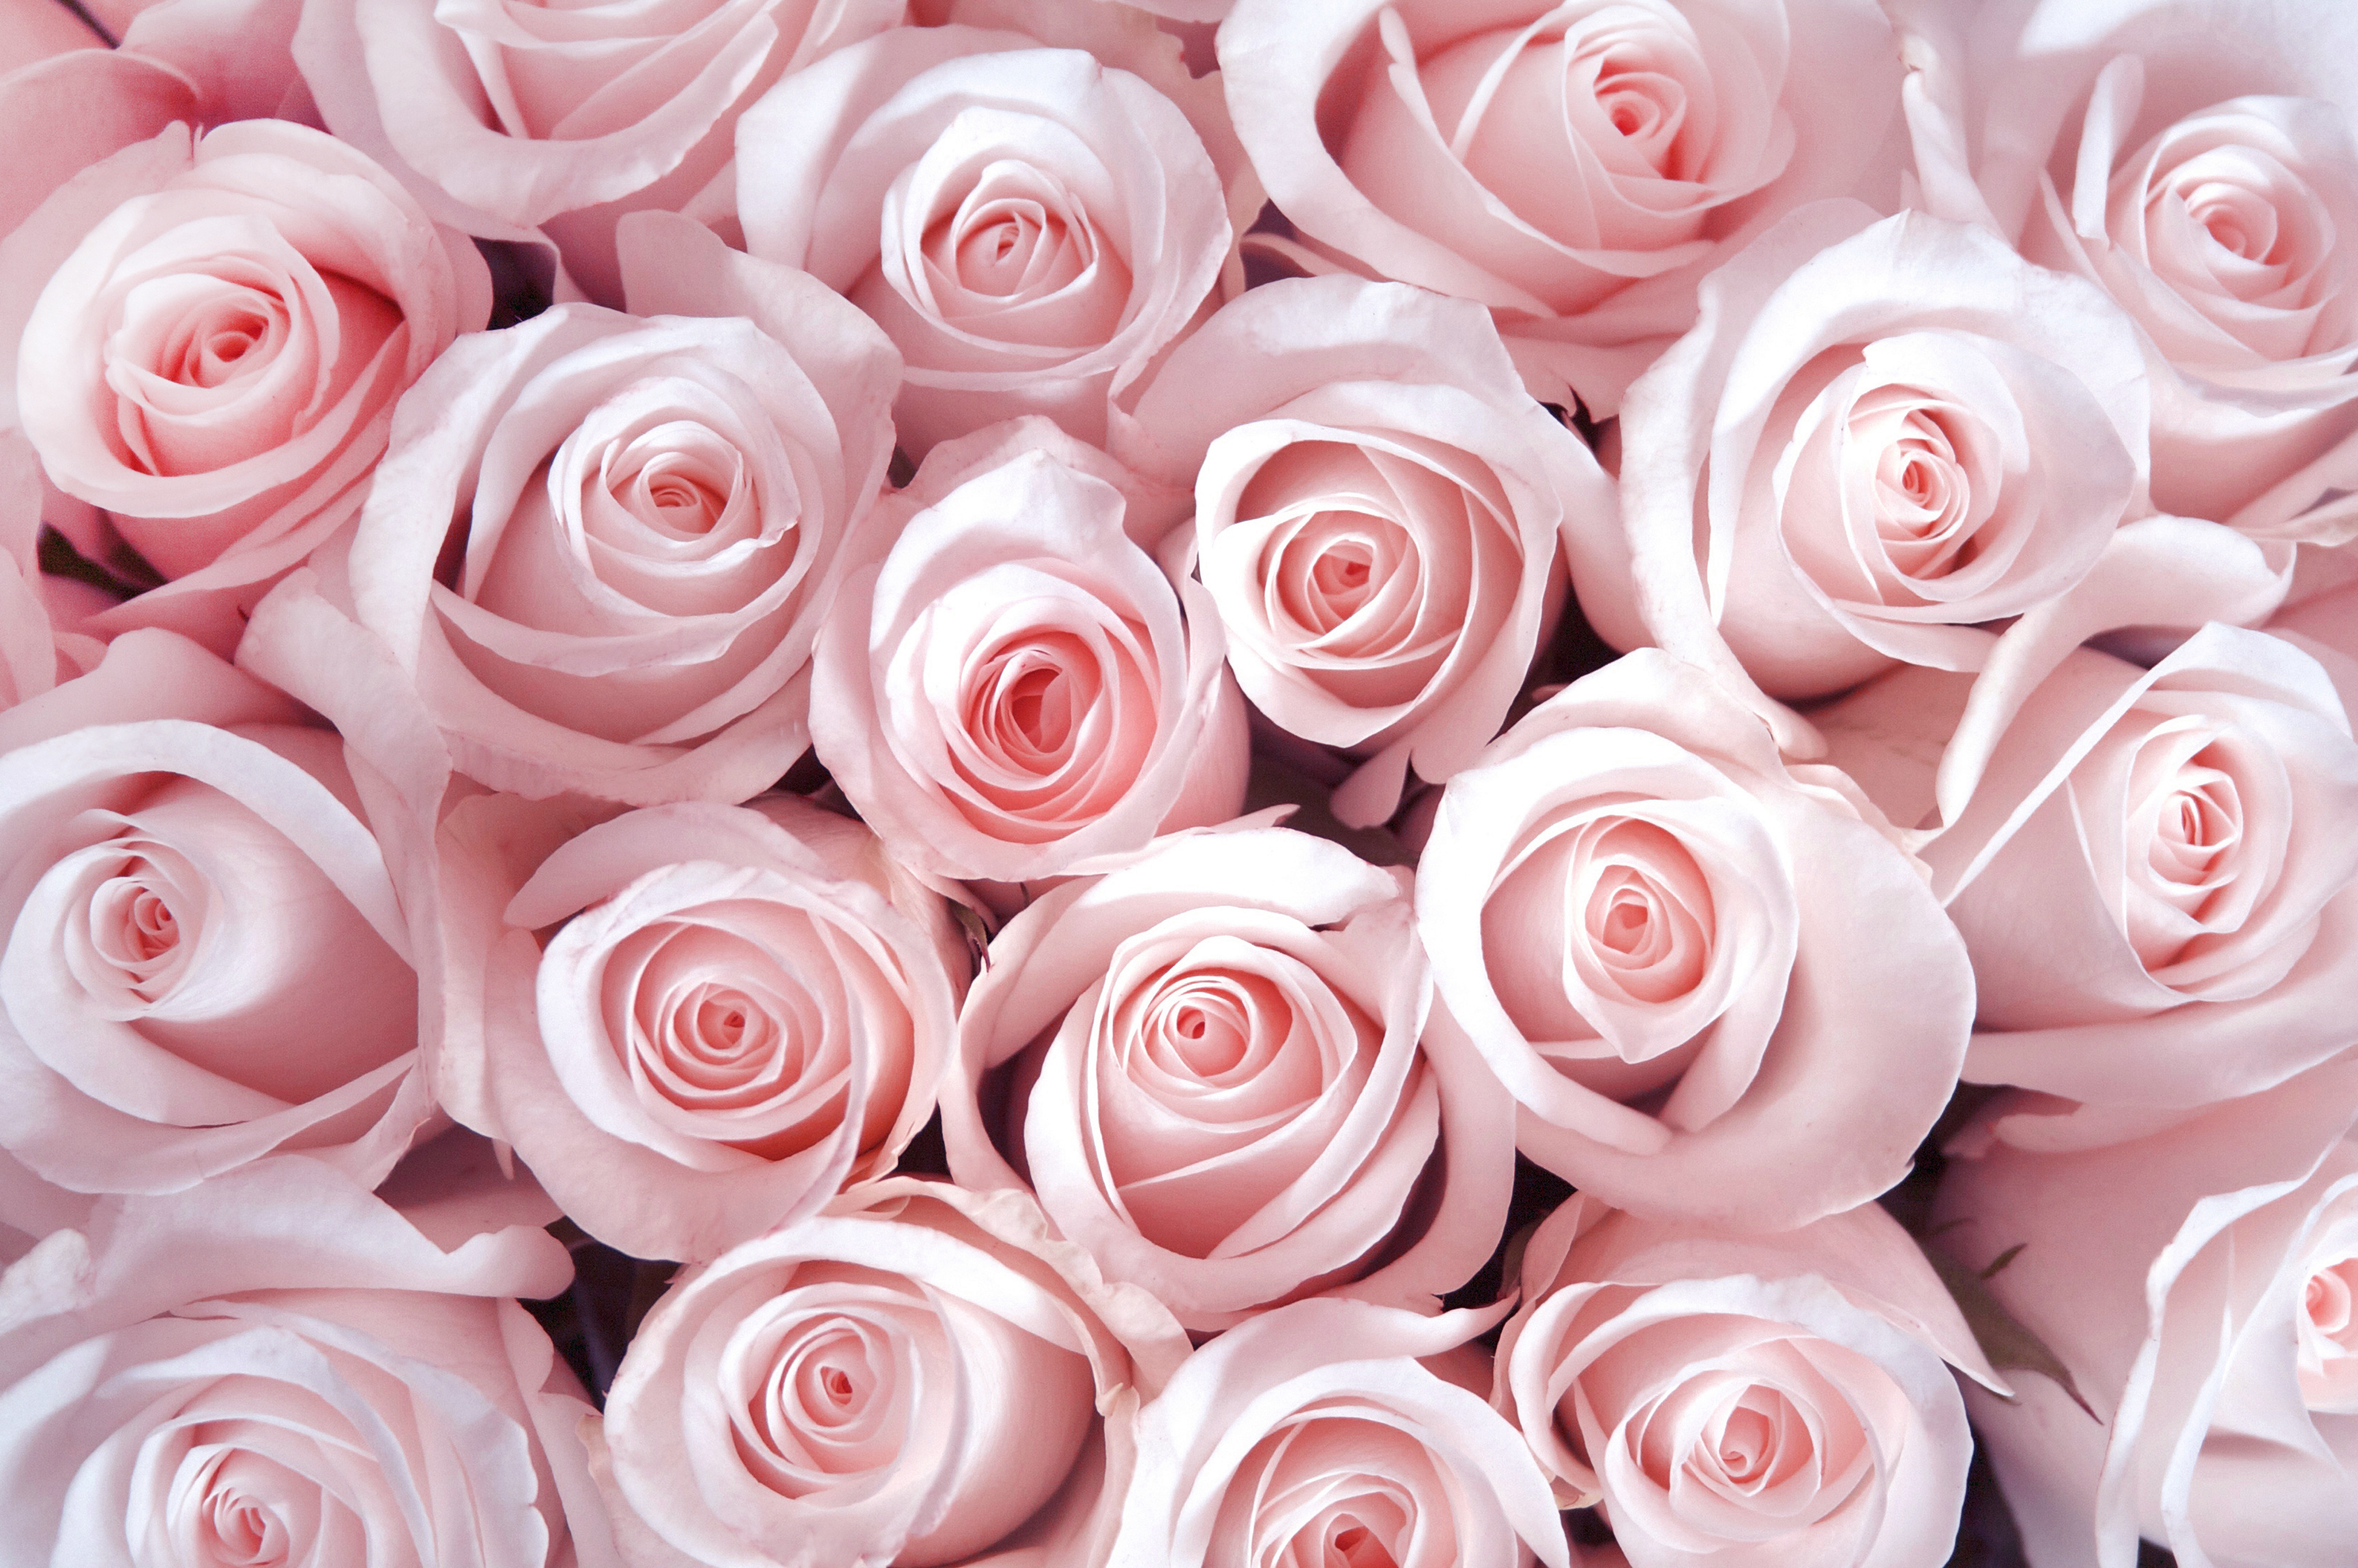 A bouqet of pink roses